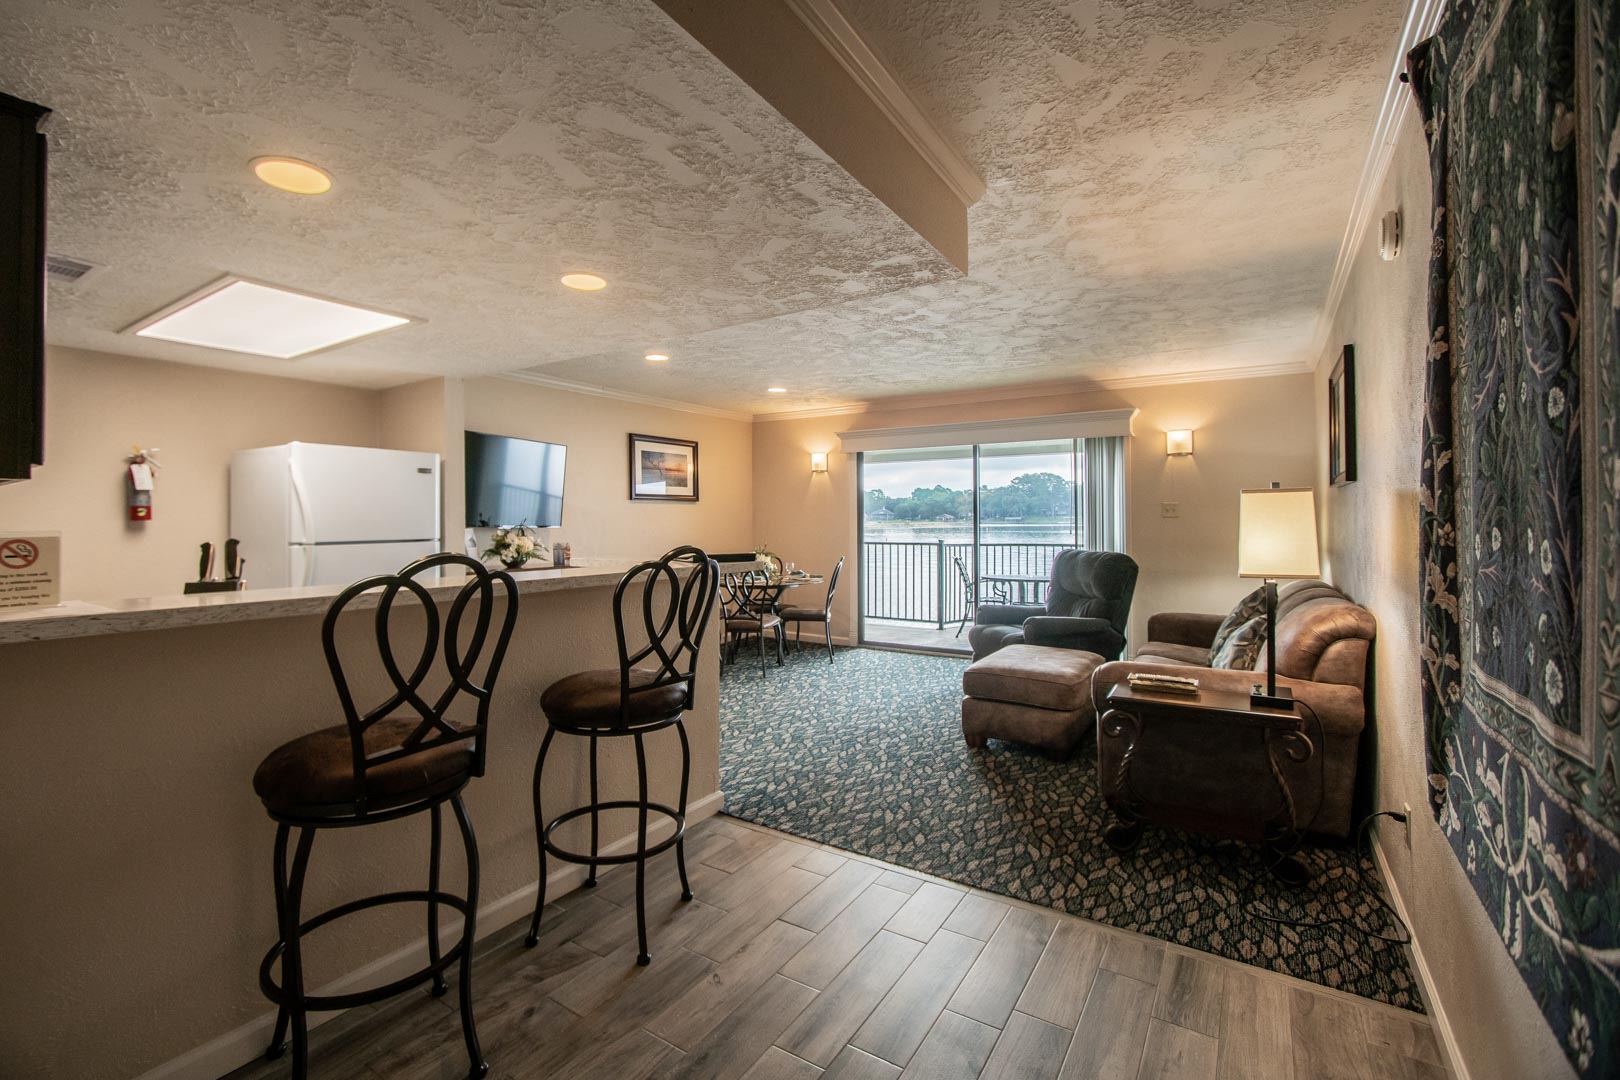 A fully equipped condominium at VRI's Landing at Seven Coves in Willis, TX.